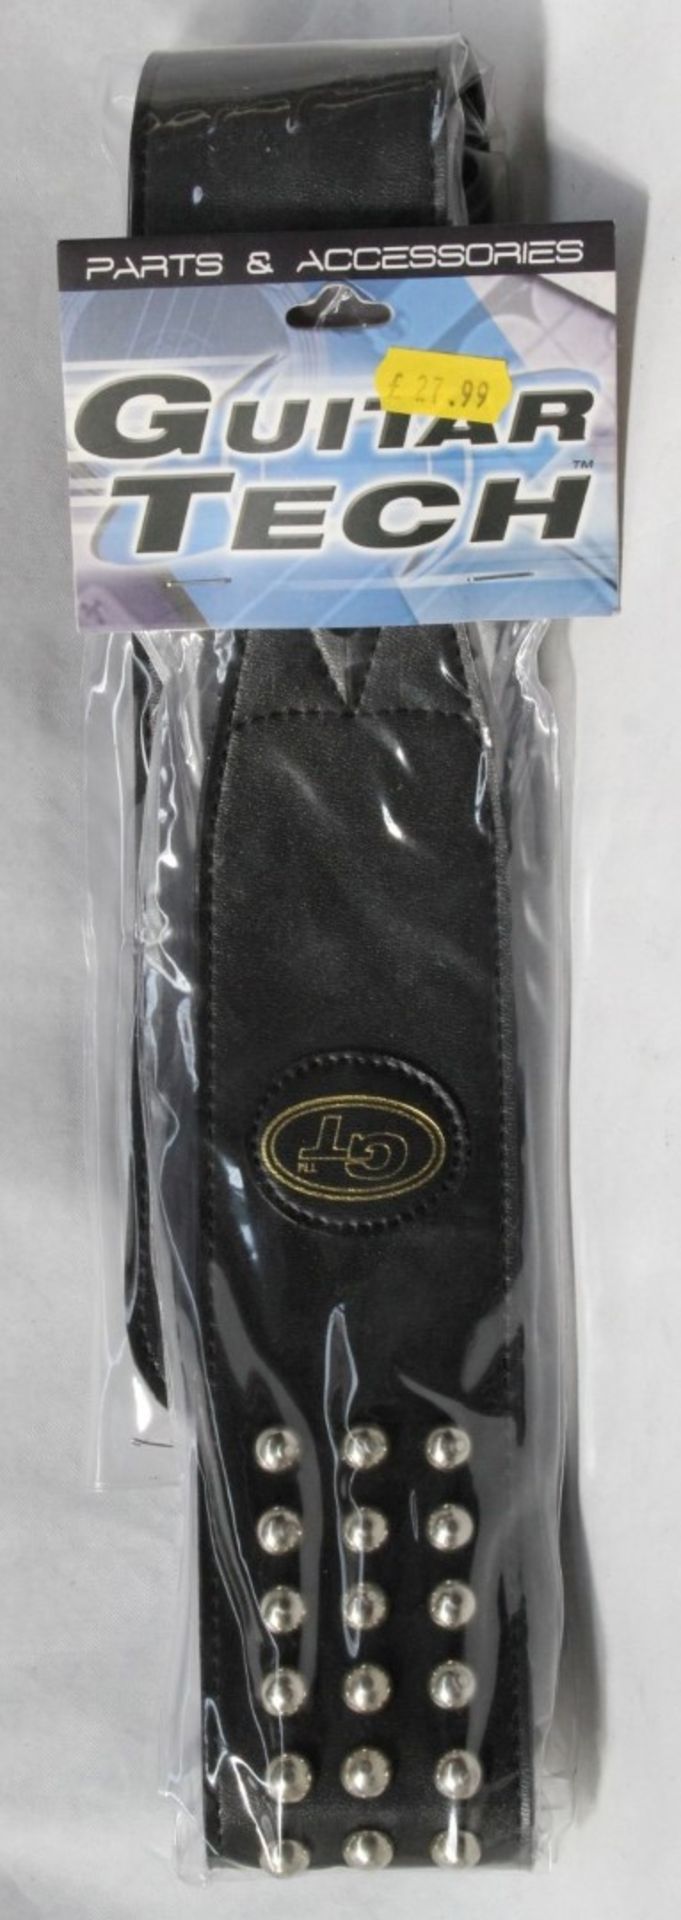 1 x Guitar Tech Leather Studded Guitar Strap - New in Packet - CL020 - Ref Pro173 - Location: Altrin - Image 6 of 8